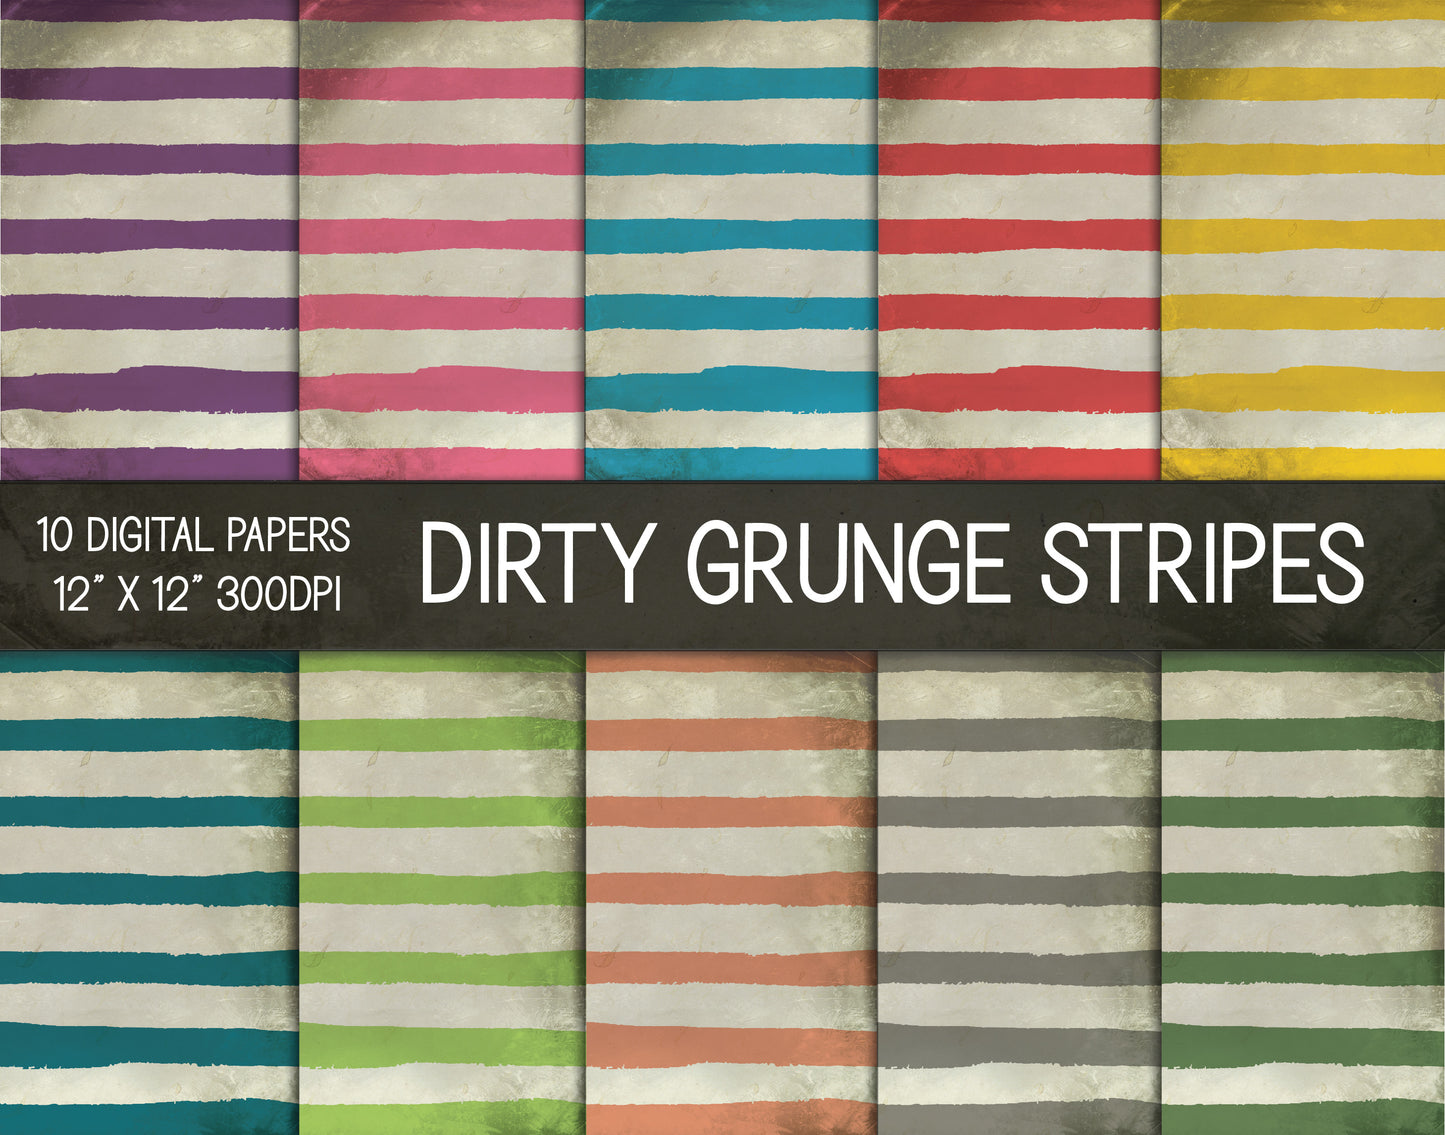 Dirty Grunge Striped Digital Papers, Grunge Texture Paper